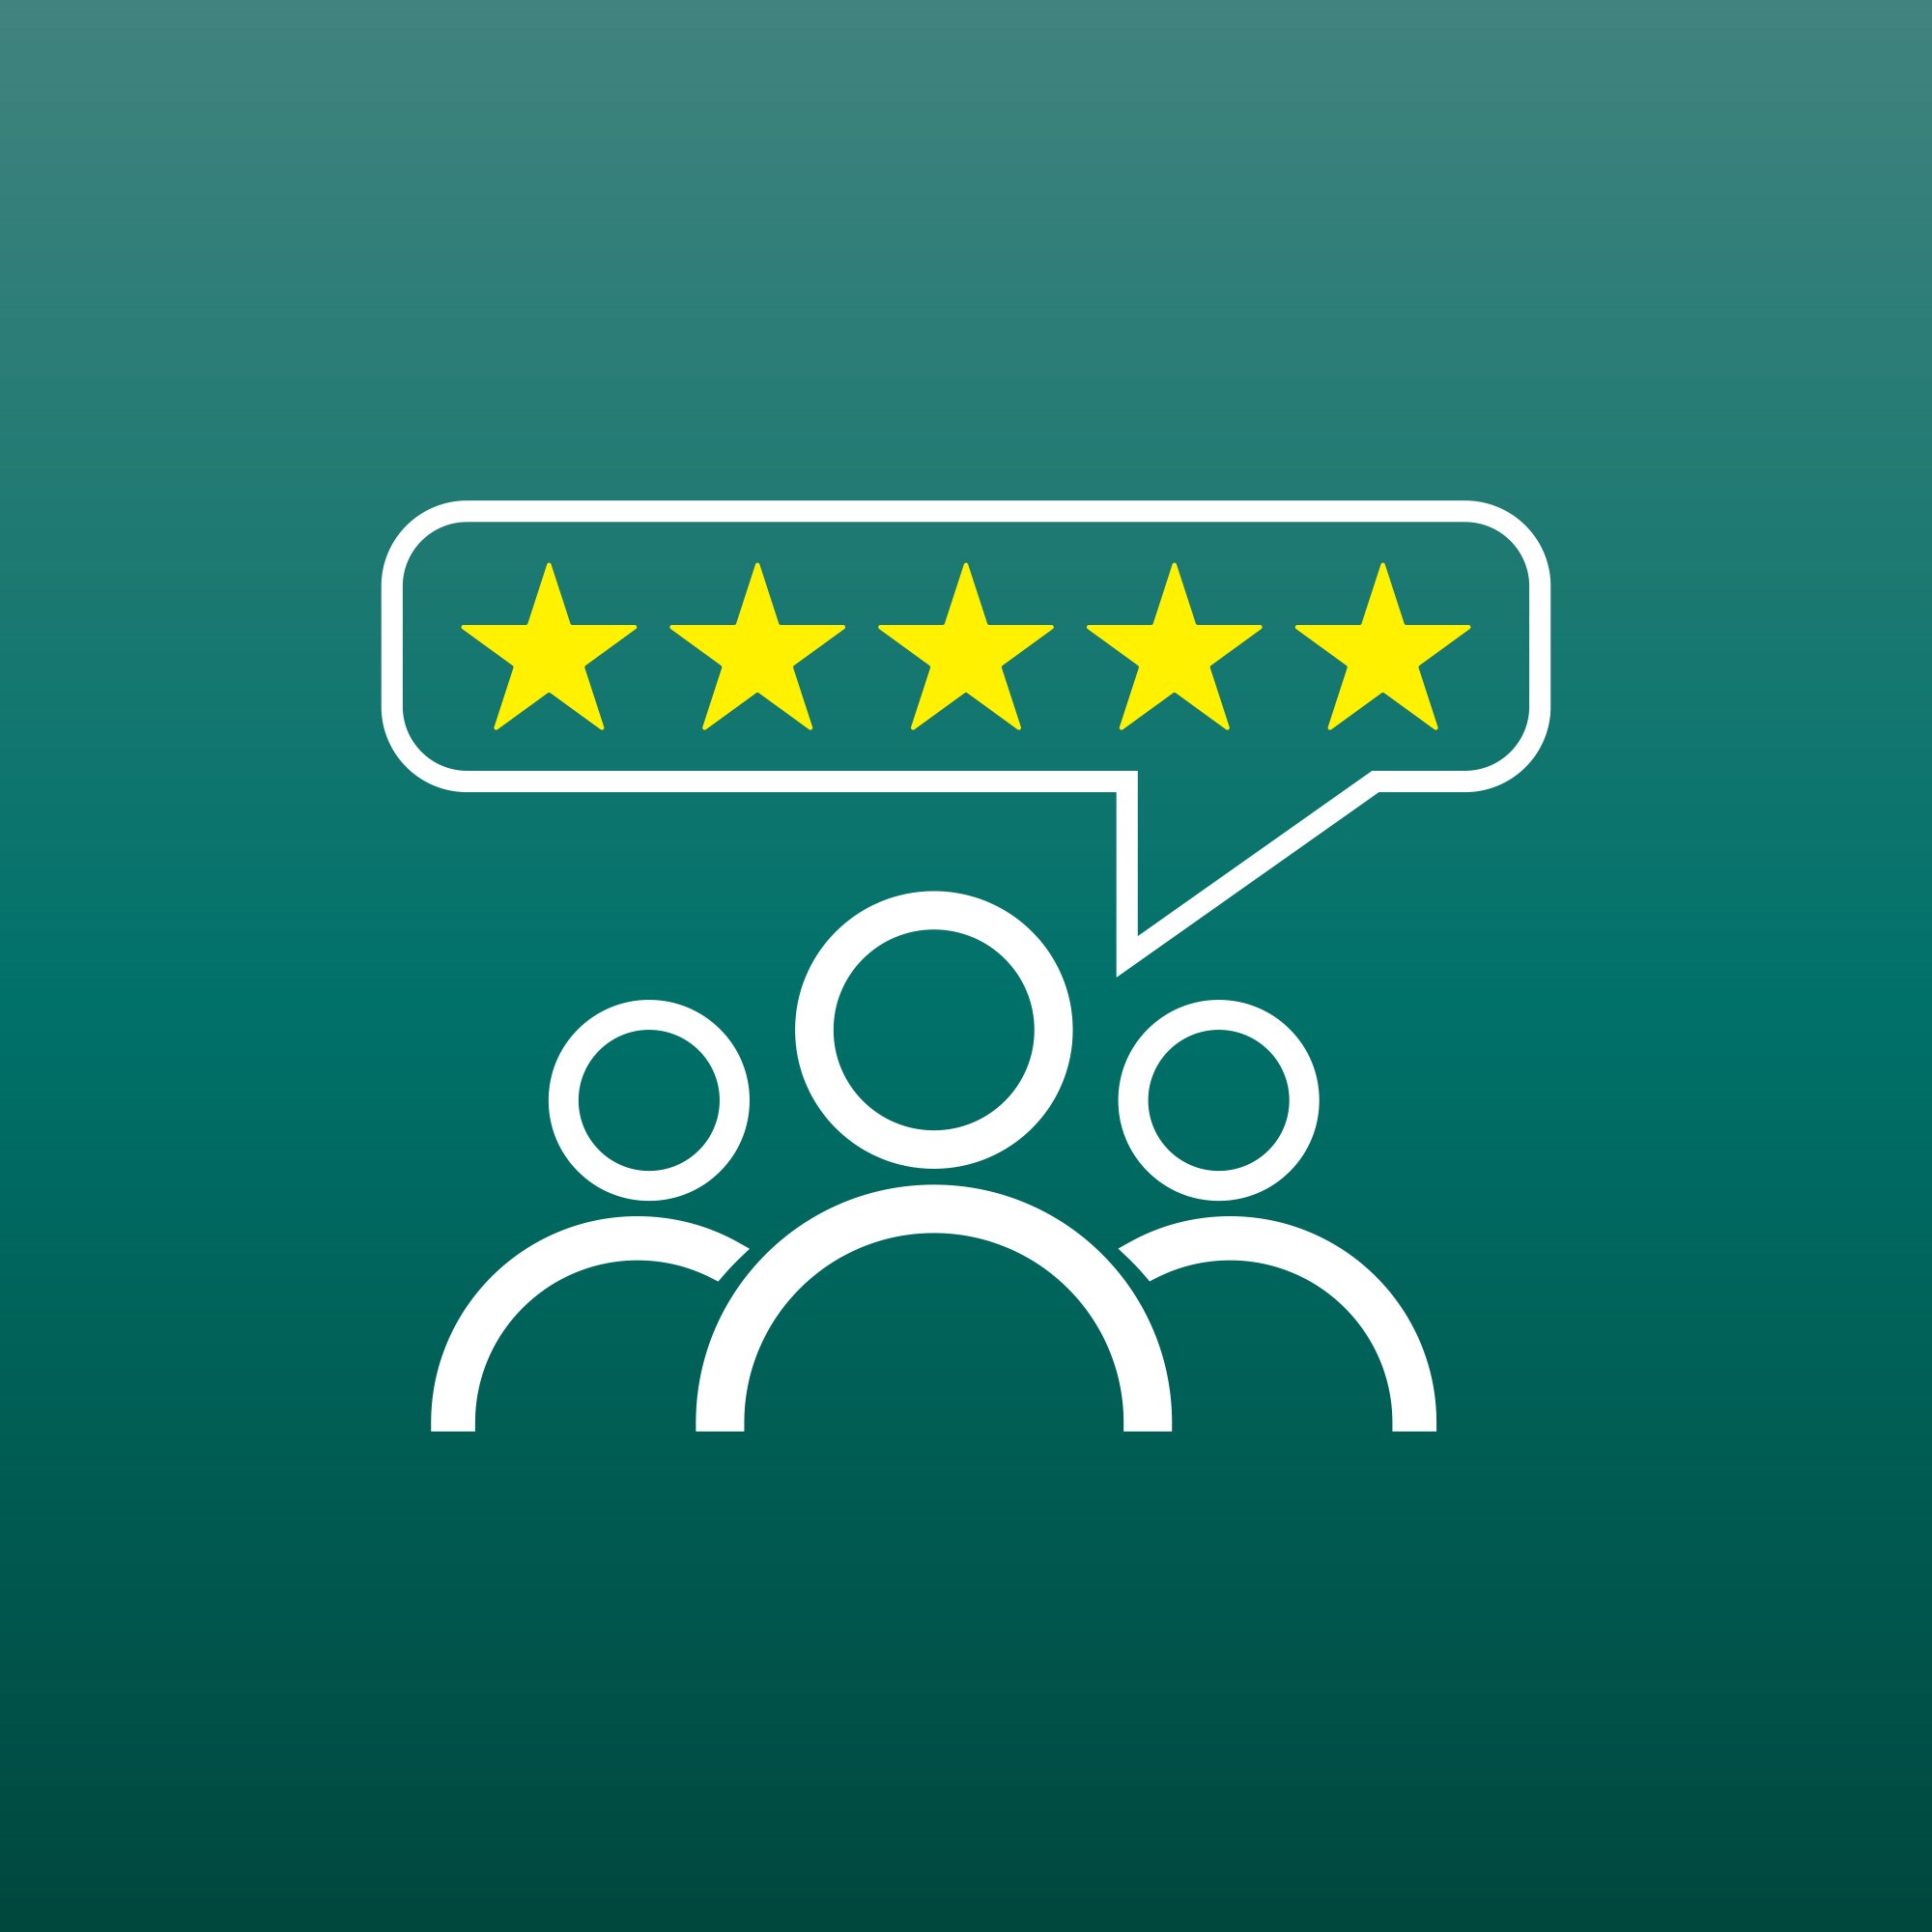 Collect voice of the customer via customer reviews